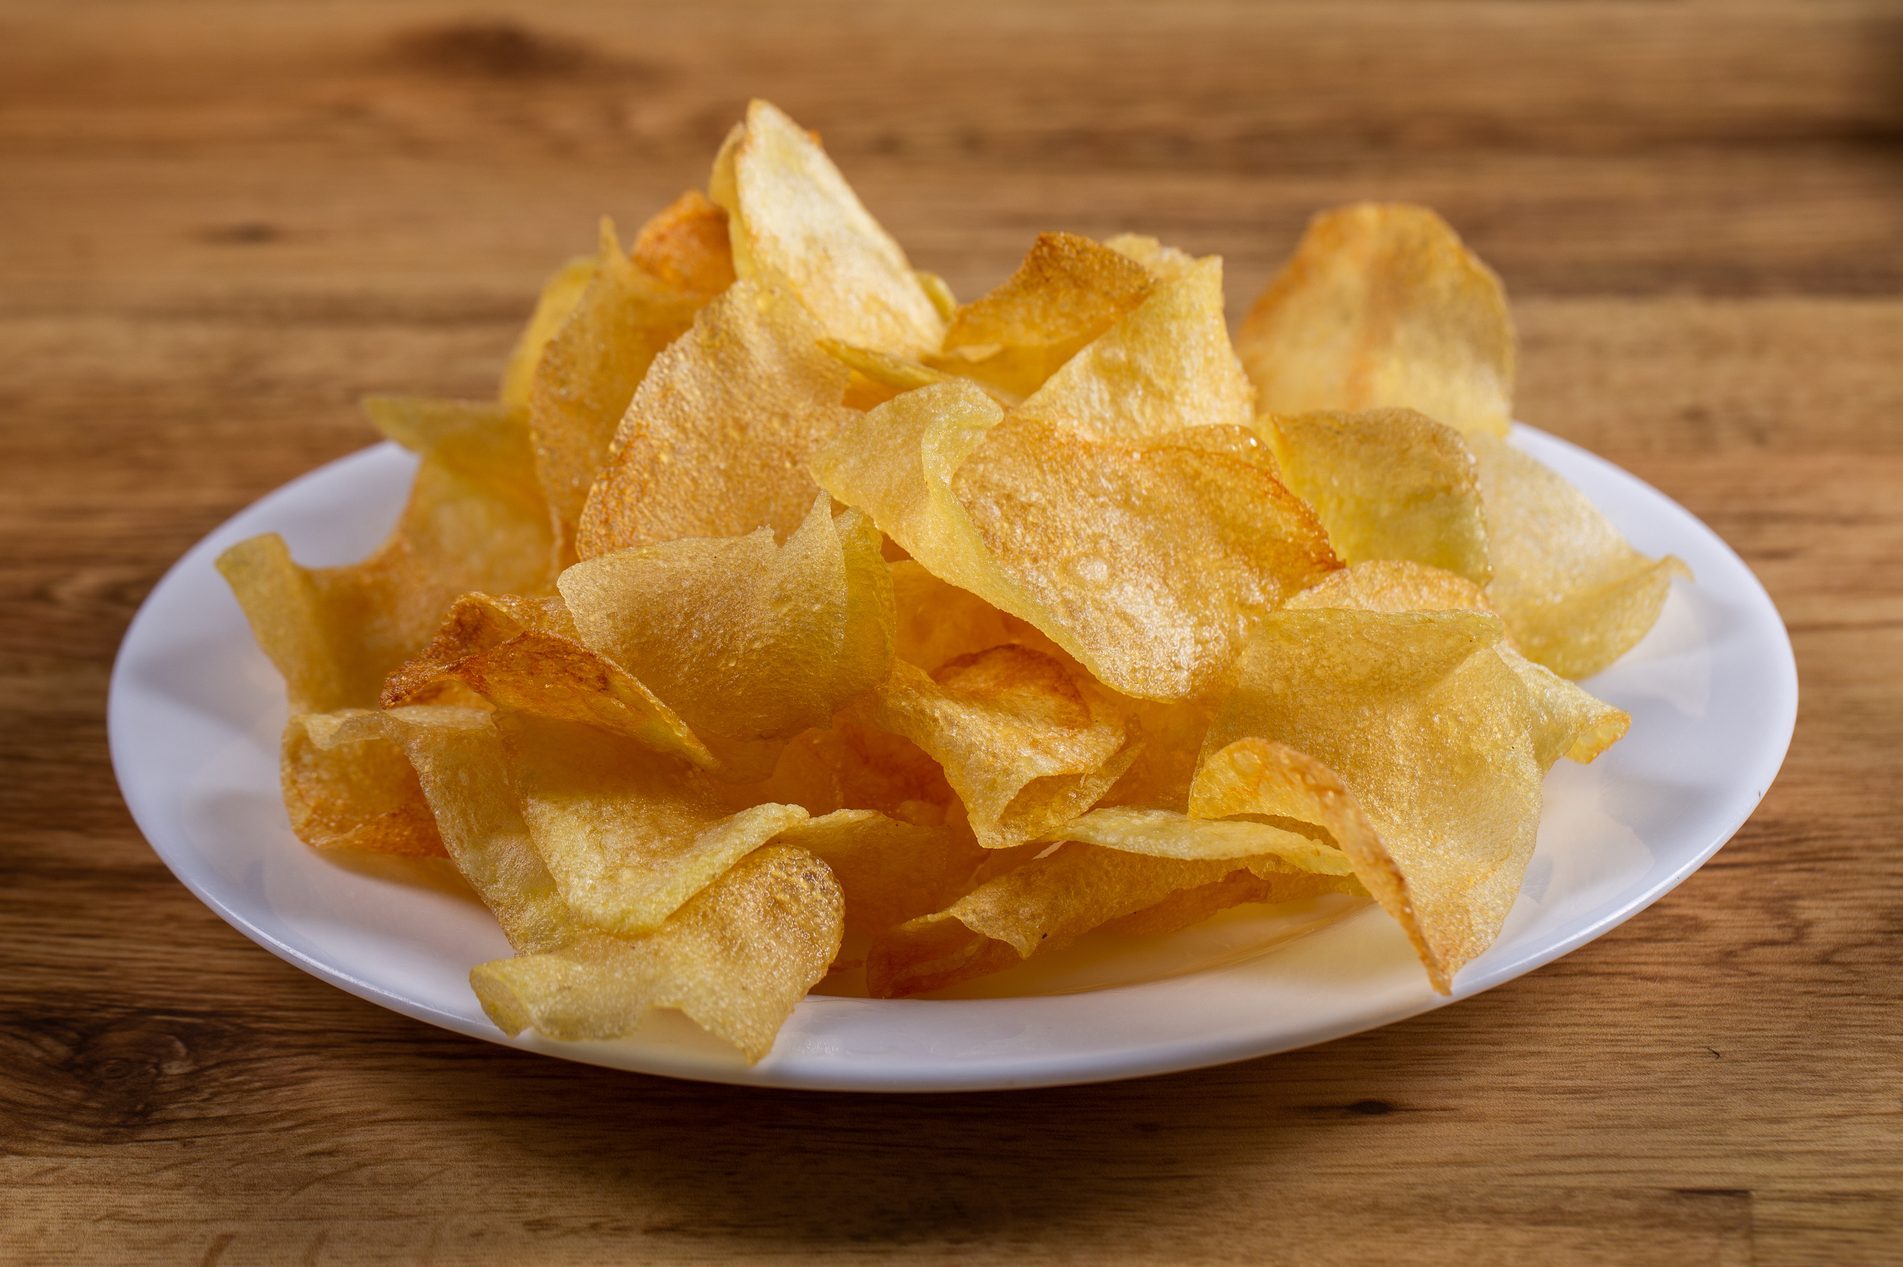 portion of potato chips on wooden background.